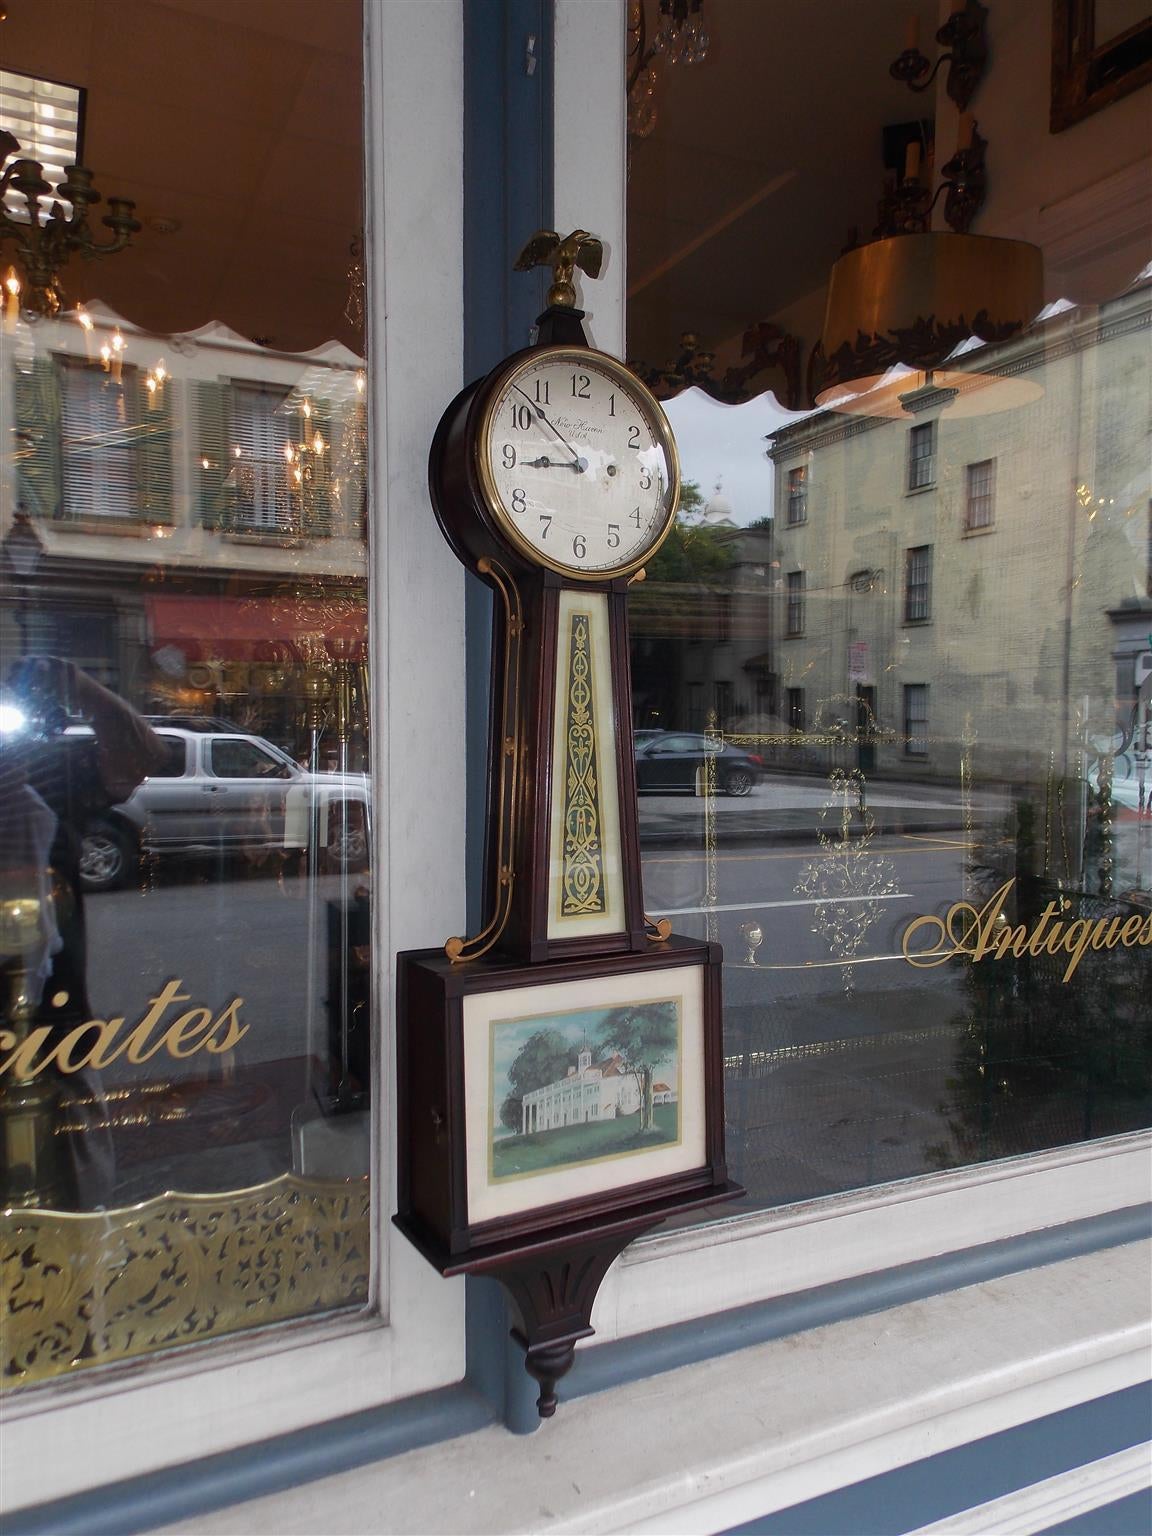 American mahogany banjo clock with a perched eagle finial, steel engraved dial under glass, centered decorative gilt reversed painted glass, lower hinged door with a reverse painting of Mount Vernon, flanking brass galleries, and terminating with a